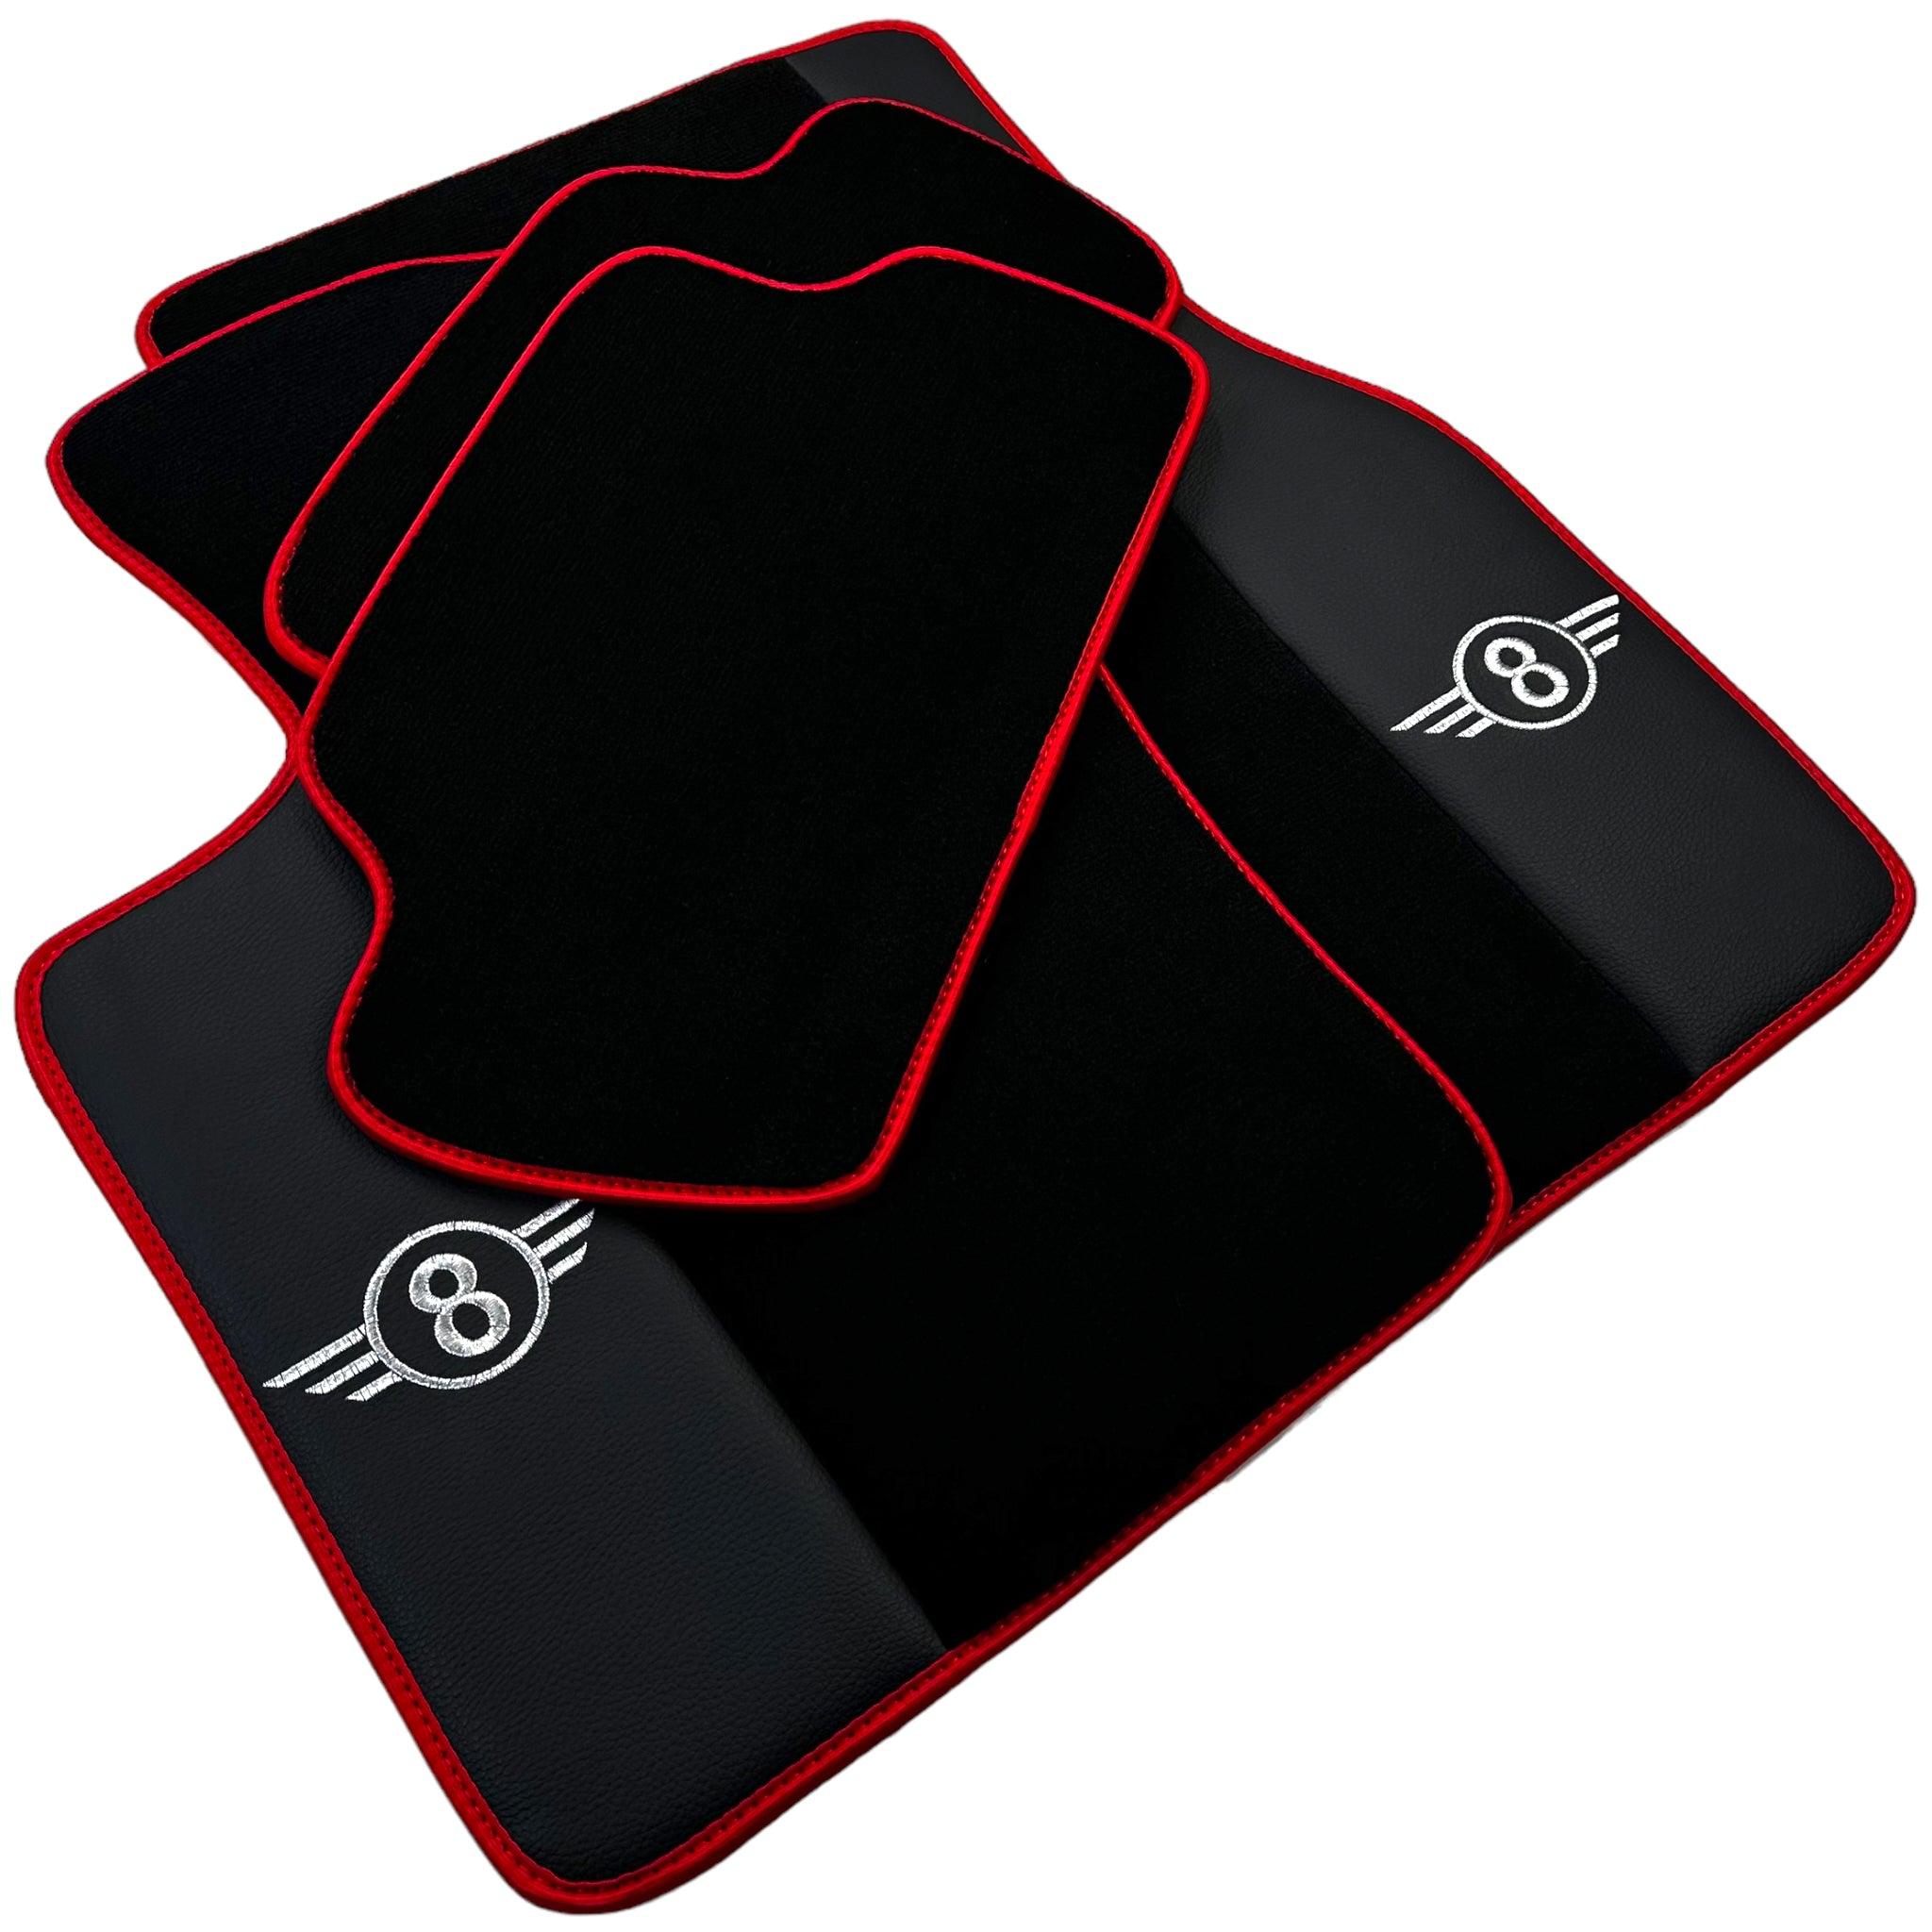 Black Floor Mats for Mini Cabrio R52 Convertible (2004-2009) With Leather | Red Trim